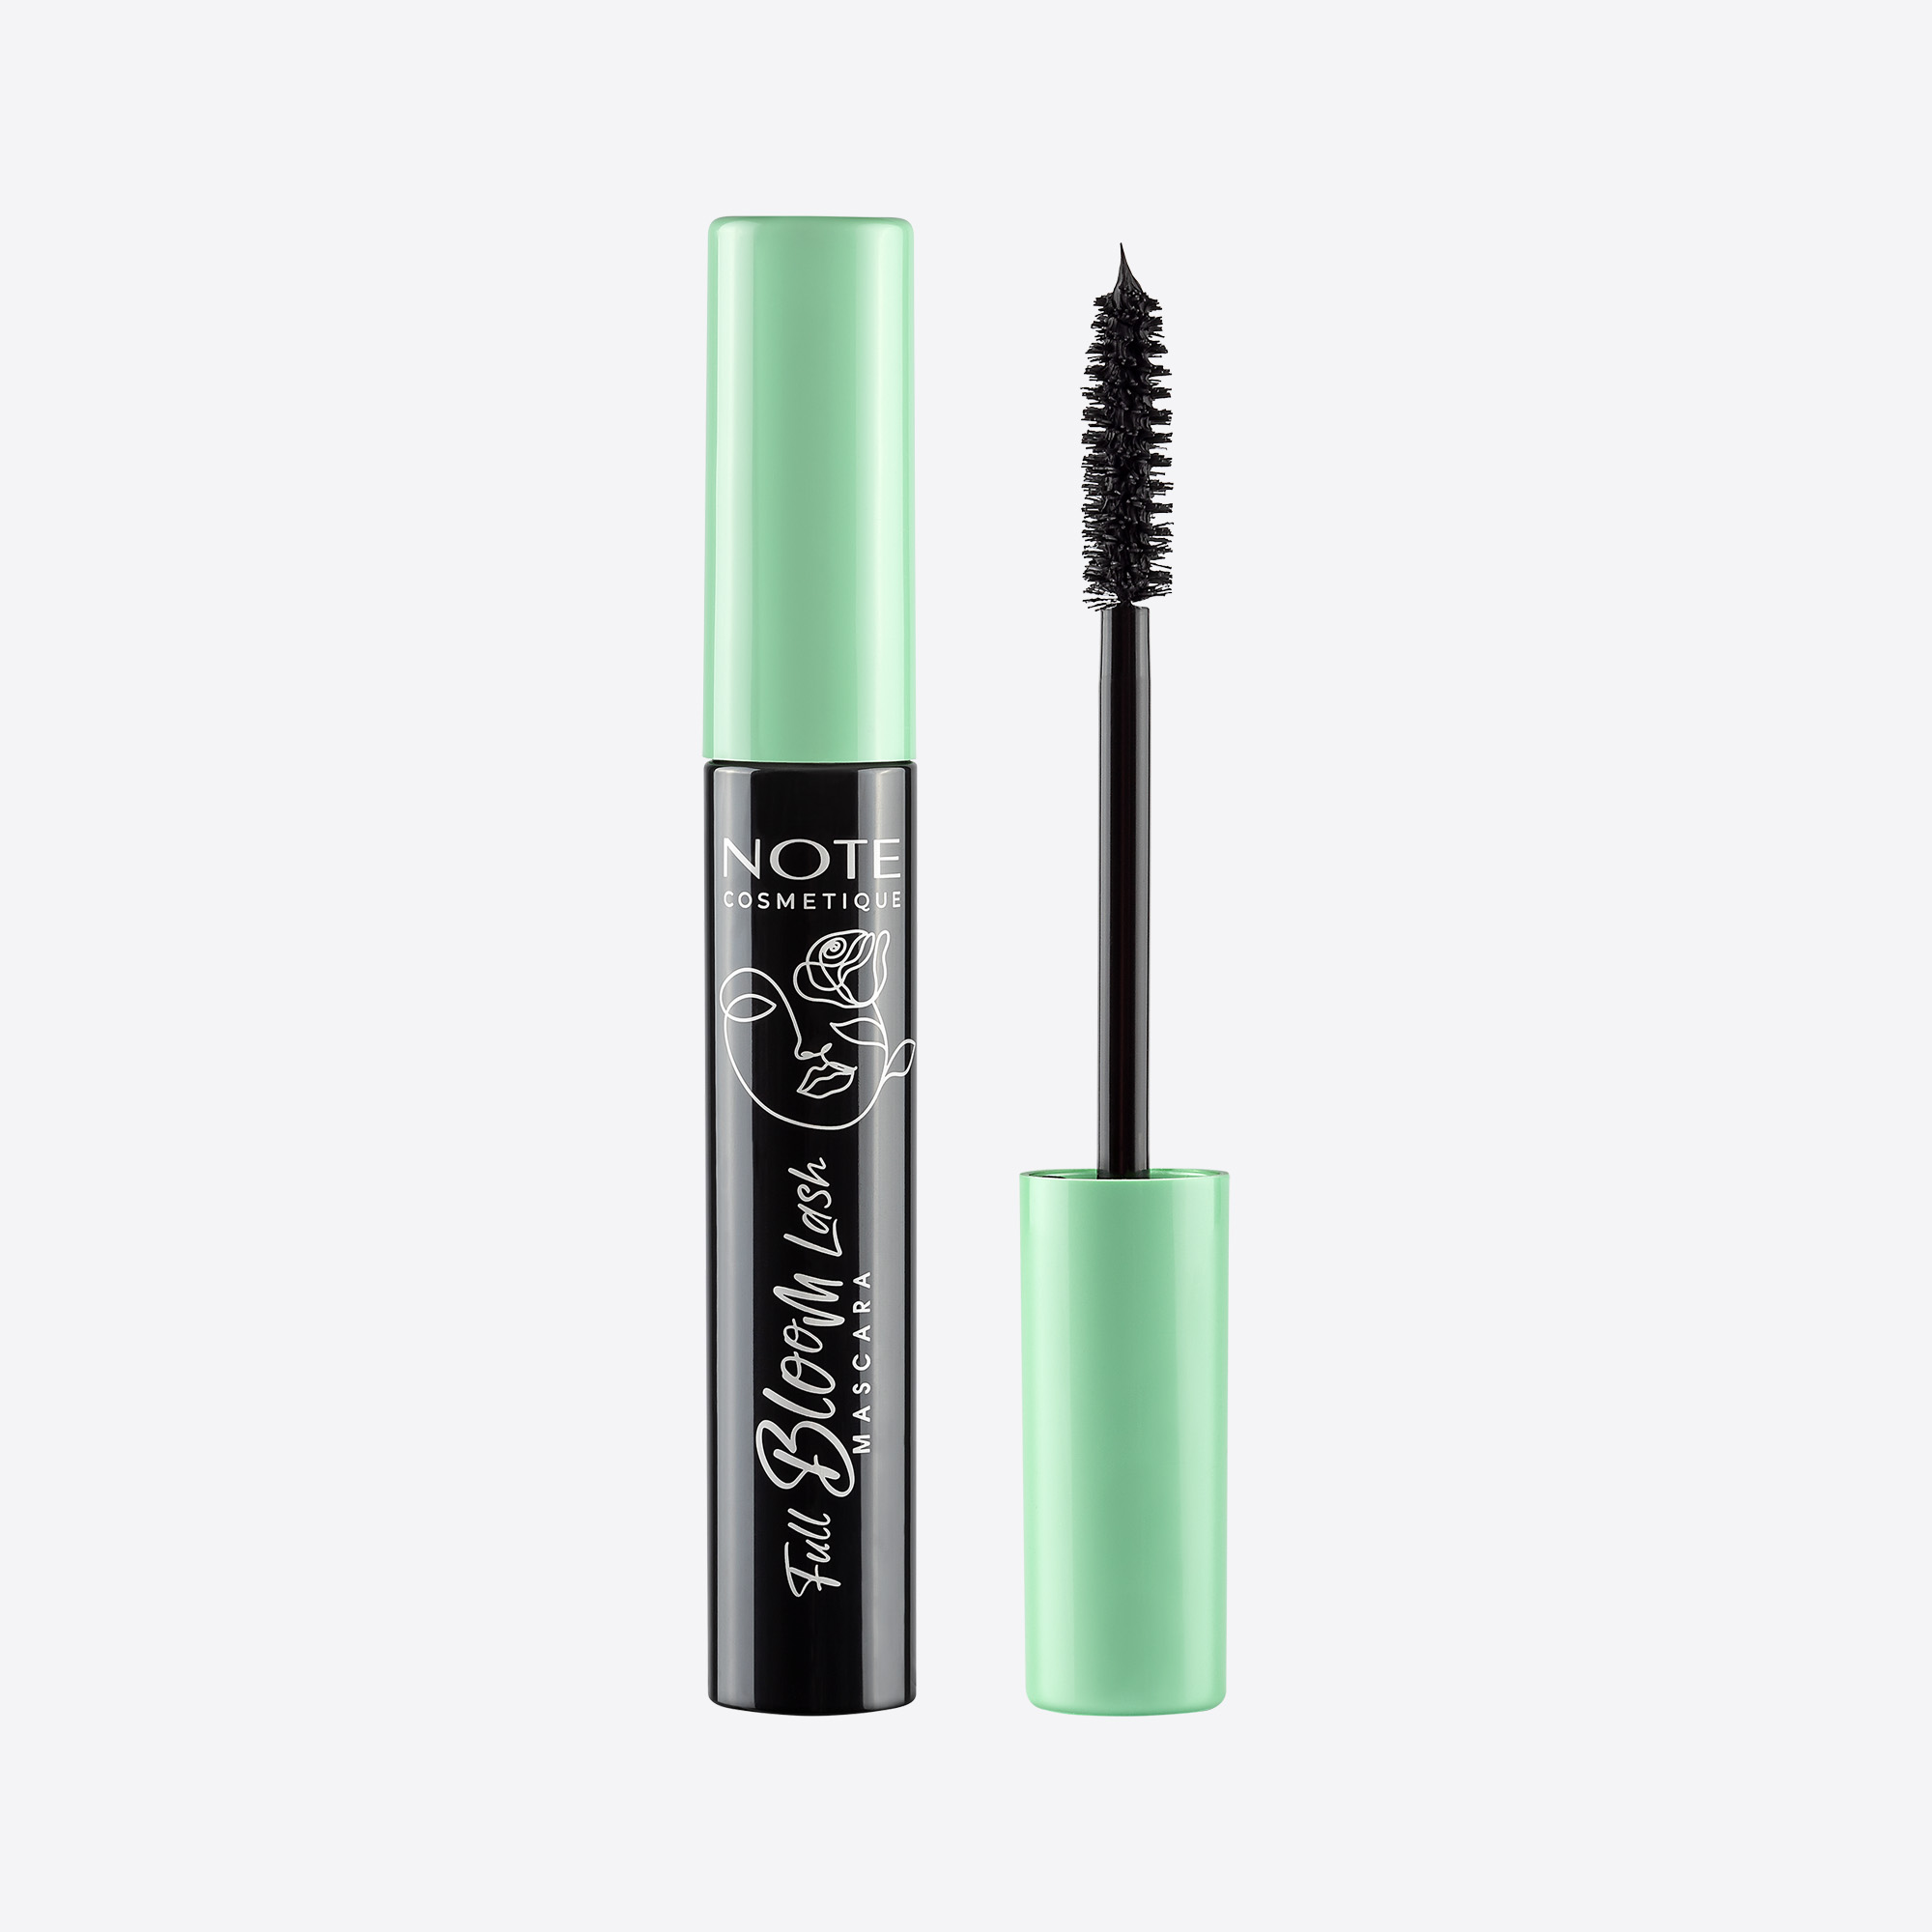 MAKE YOUR EYES BLOOM WITH THE NEWEST ADDITION TO THE NOTE COSMETIQUE FAMILY, FULL BLOOM MASCARA!/BeautifulJobs